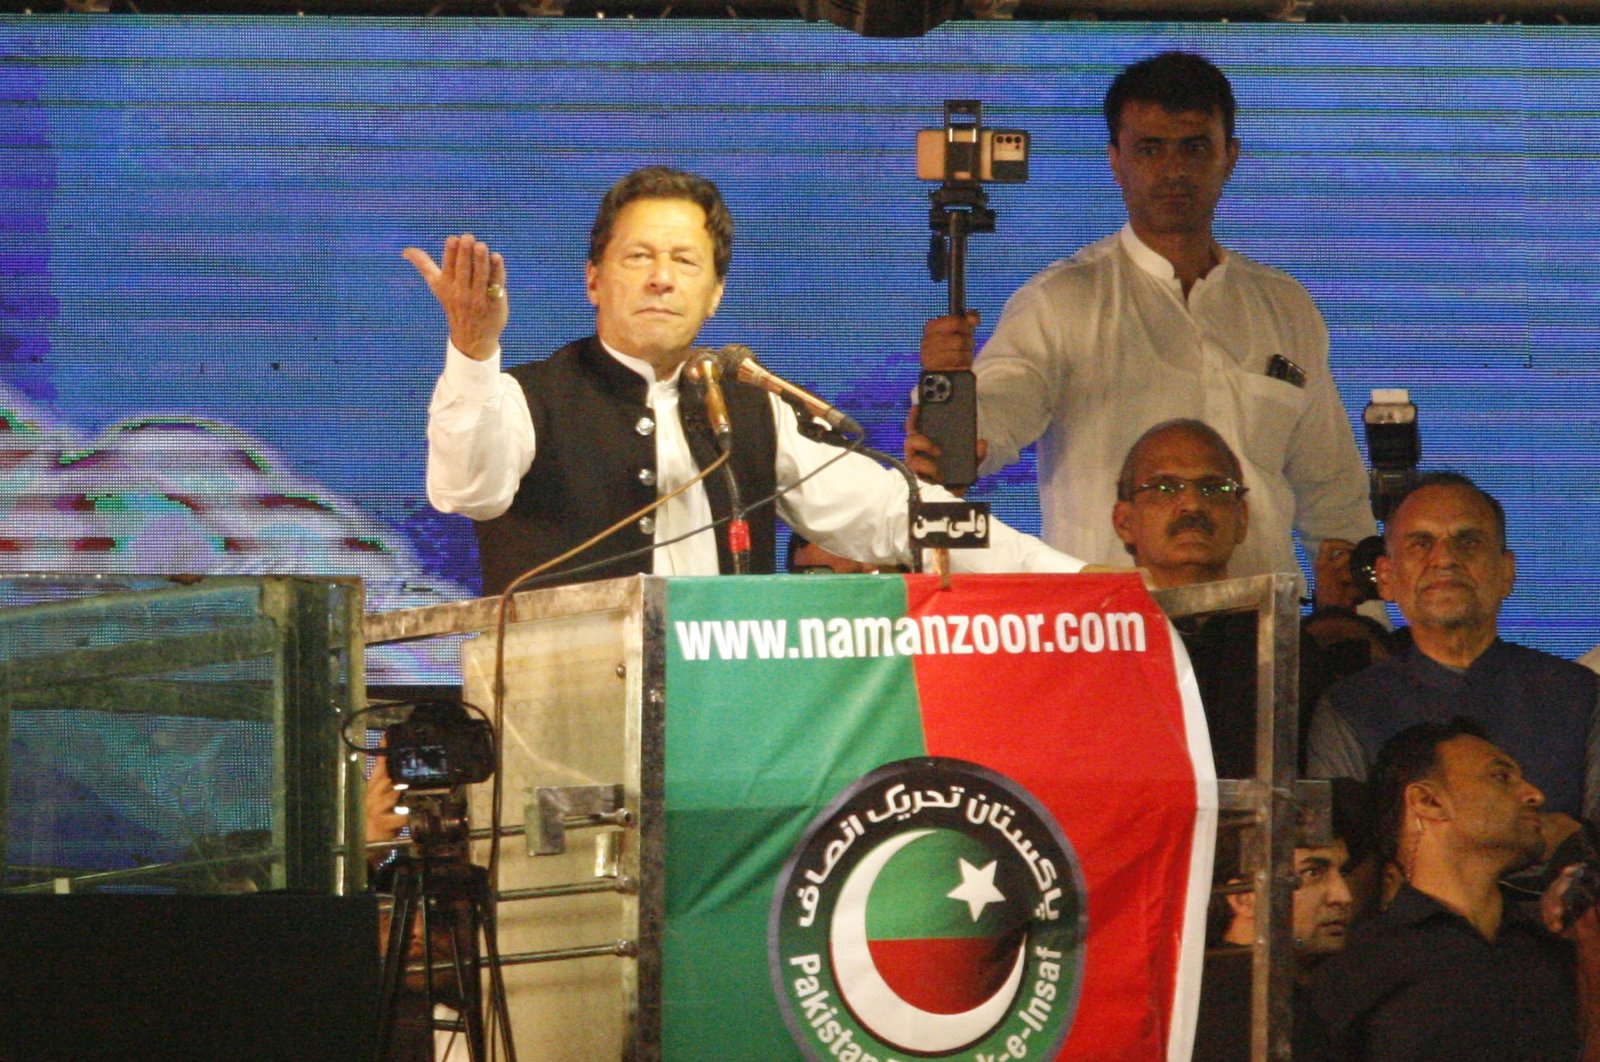 Former Pakistani Prime Minister Imran Khan addresses supporters of the Pakistan Tehreek-e-Insaf (PTI) party, in Lahore, April 22, 2022. (AA Photo)